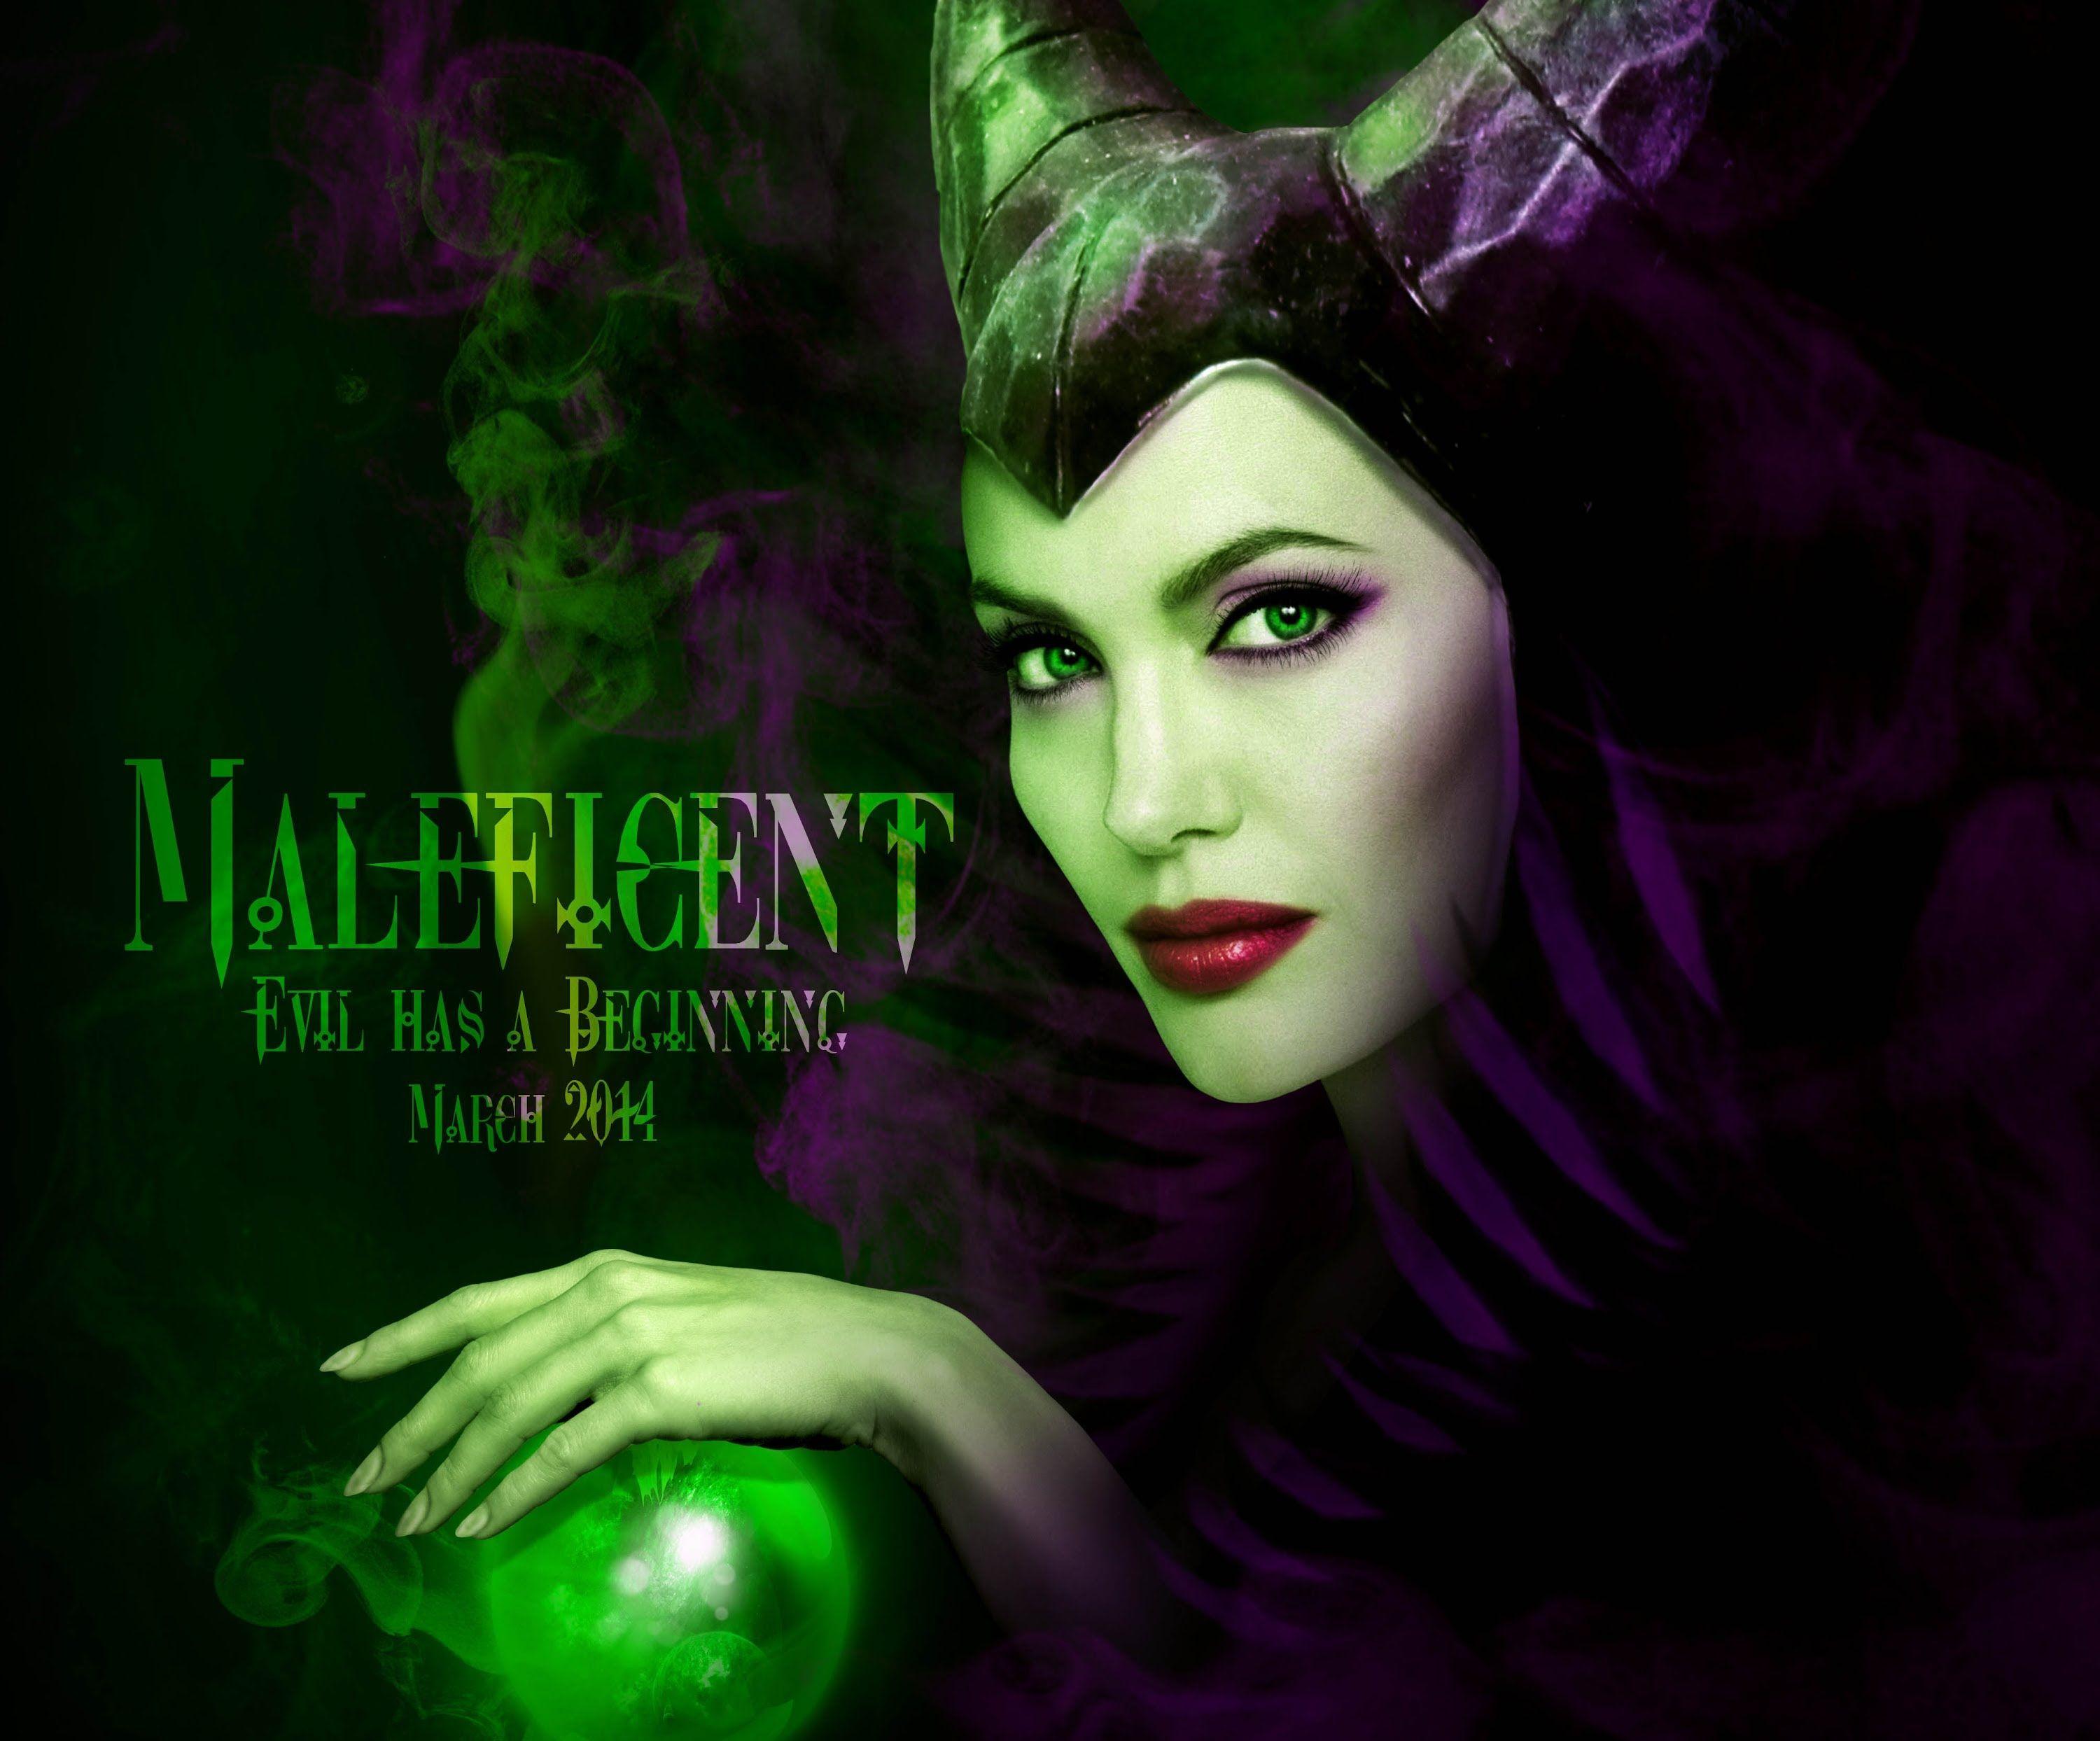 Best image about Maleficent. Disney, Maleficent